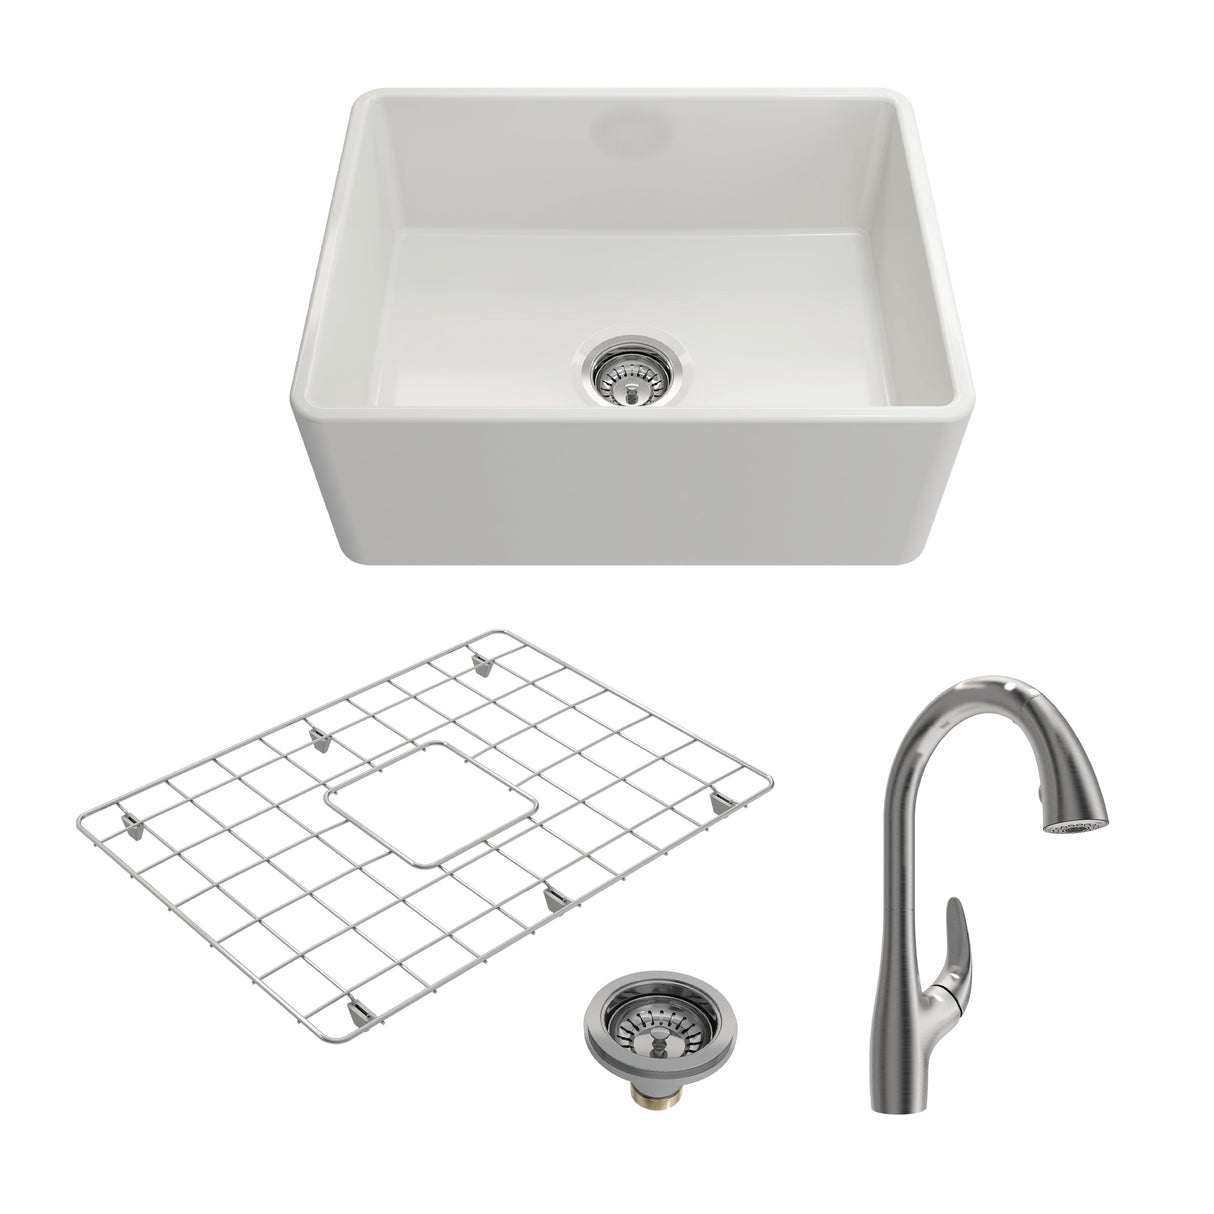 BOCCHI 1137-001-2024SS Kit: 1137 Classico Farmhouse Apron Front Fireclay 24 in. Single Bowl Kitchen Sink with Protective Bottom Grid and Strainer w/ Pagano 2.0 Faucet